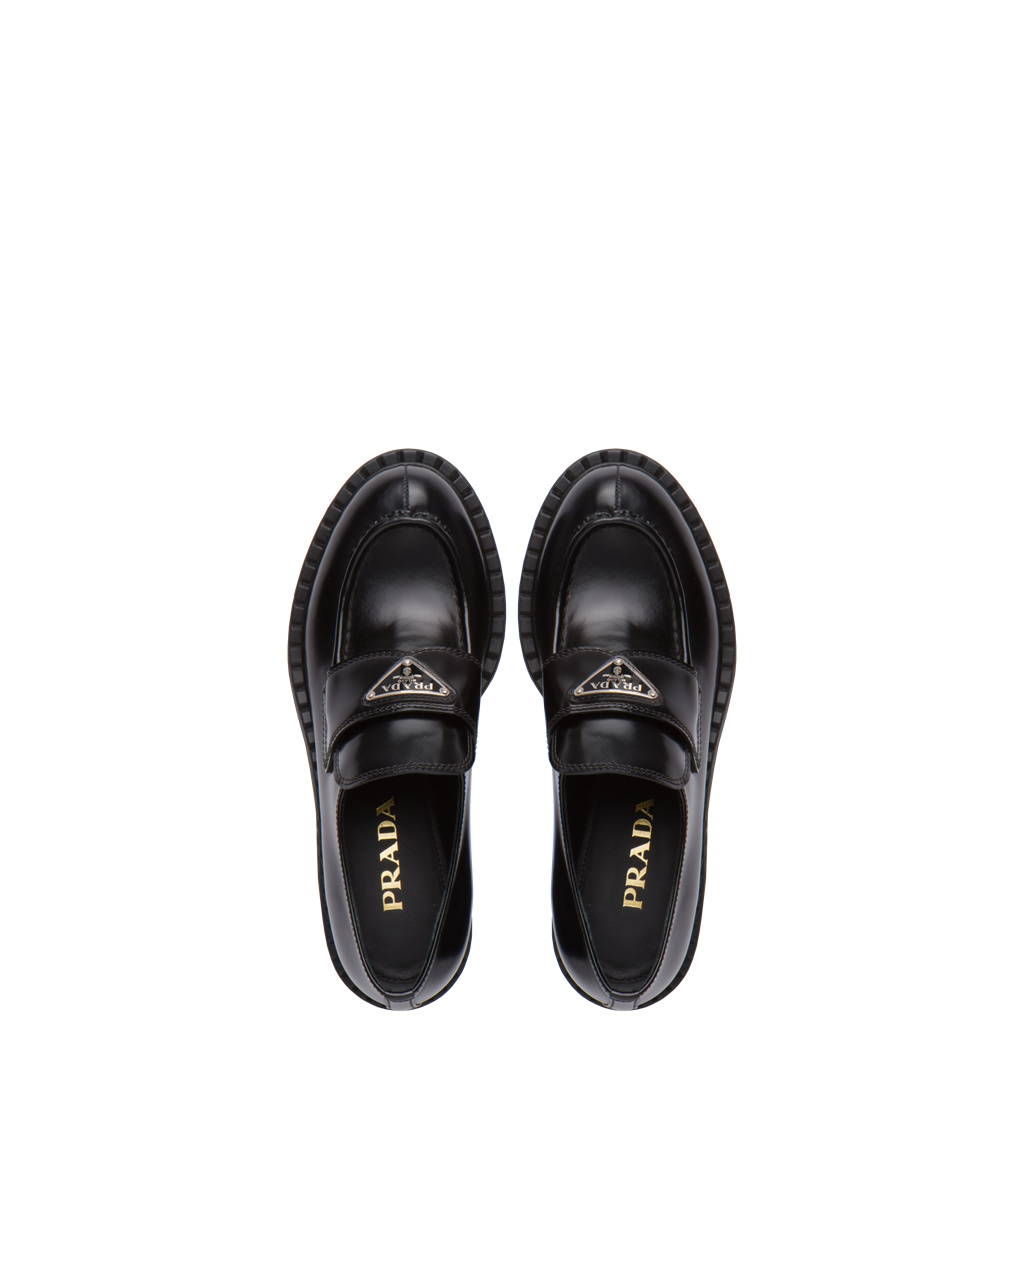 Prada Chocolate Brushed Leather Loafers Black | 1025ZVFQR